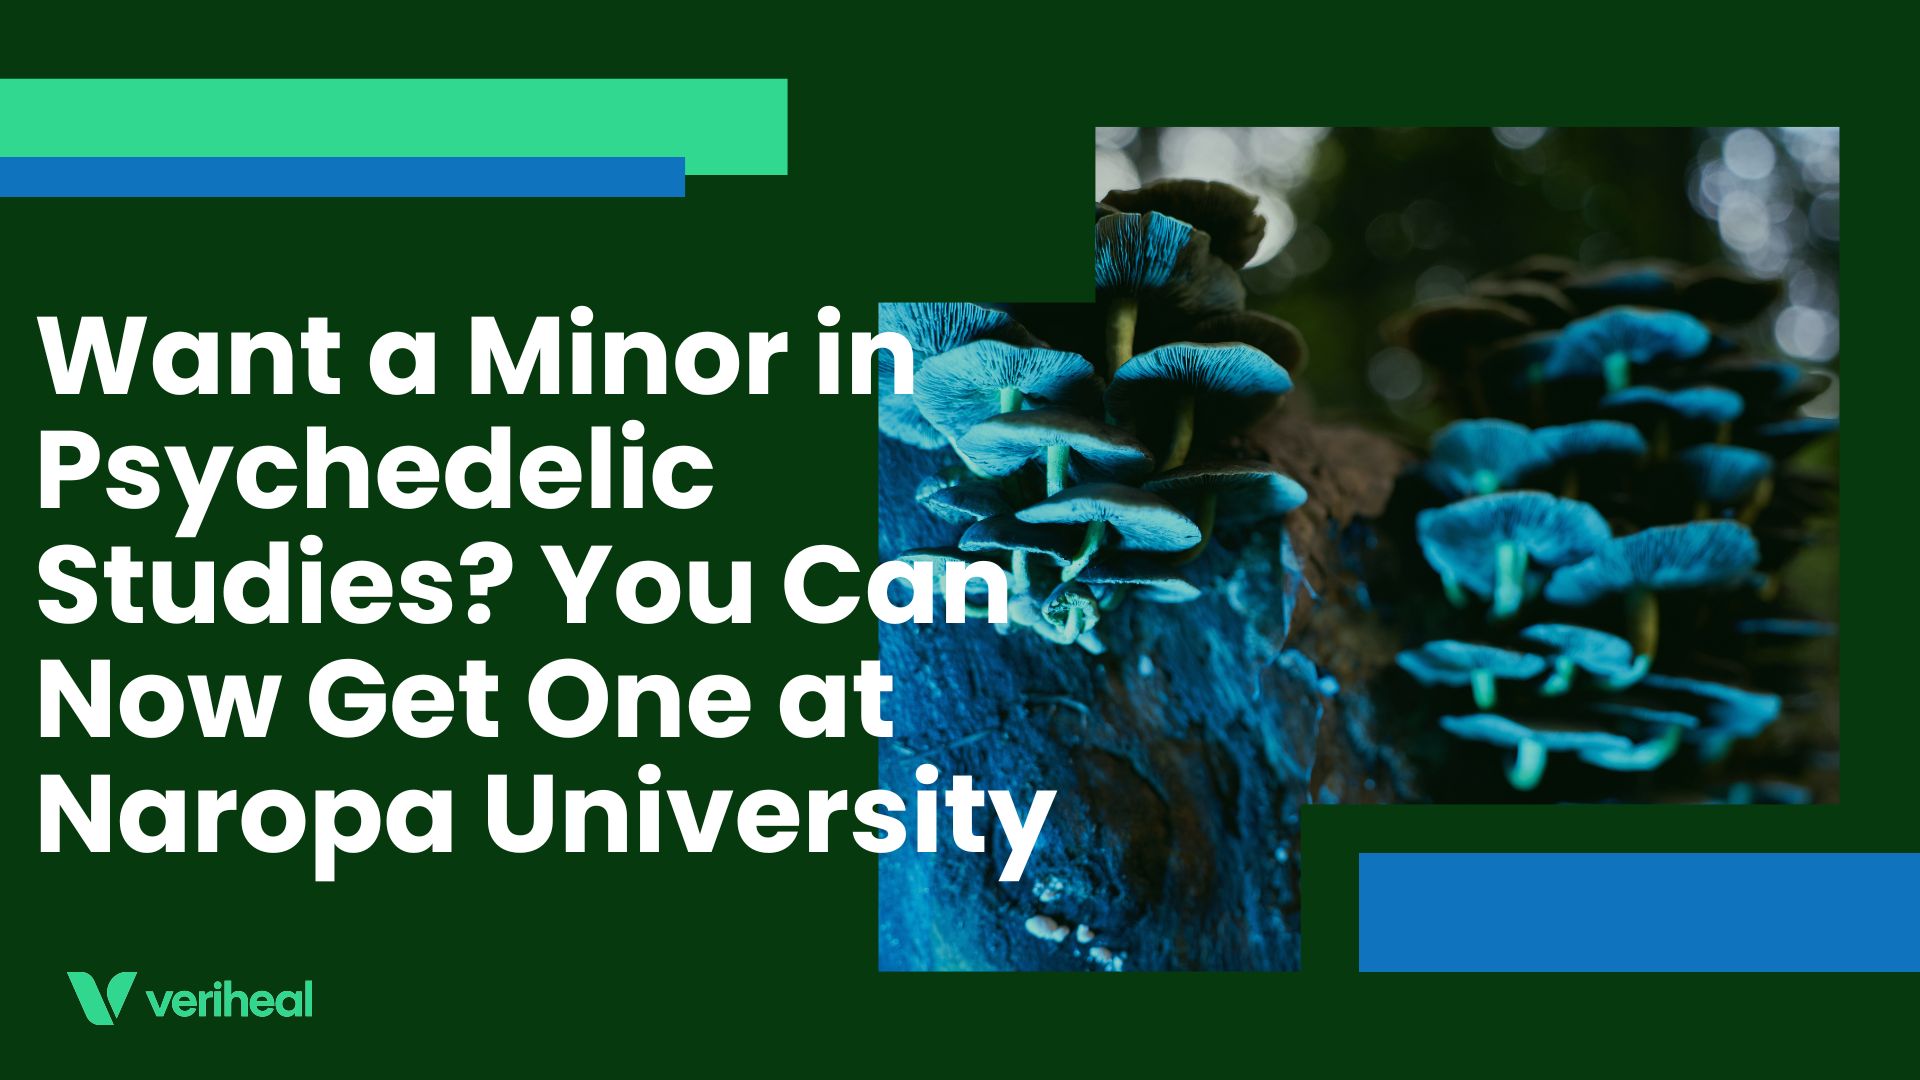 Want a Minor in Psychedelic Studies? You Can Now Get One at Naropa University